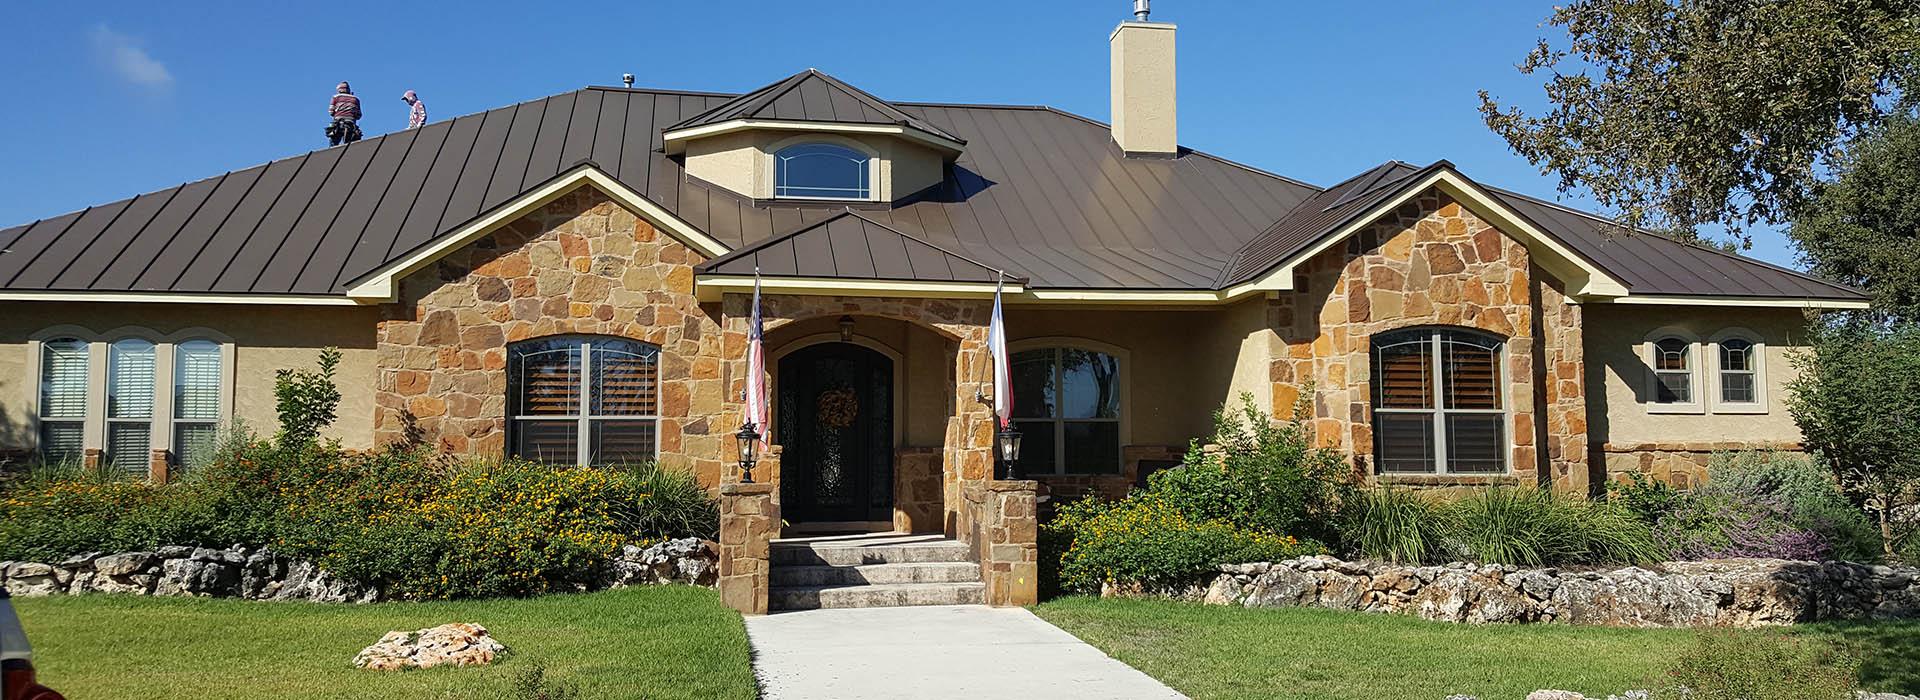 metal roofing companies dallas tx best services near me residential commercial texas metal roofing company